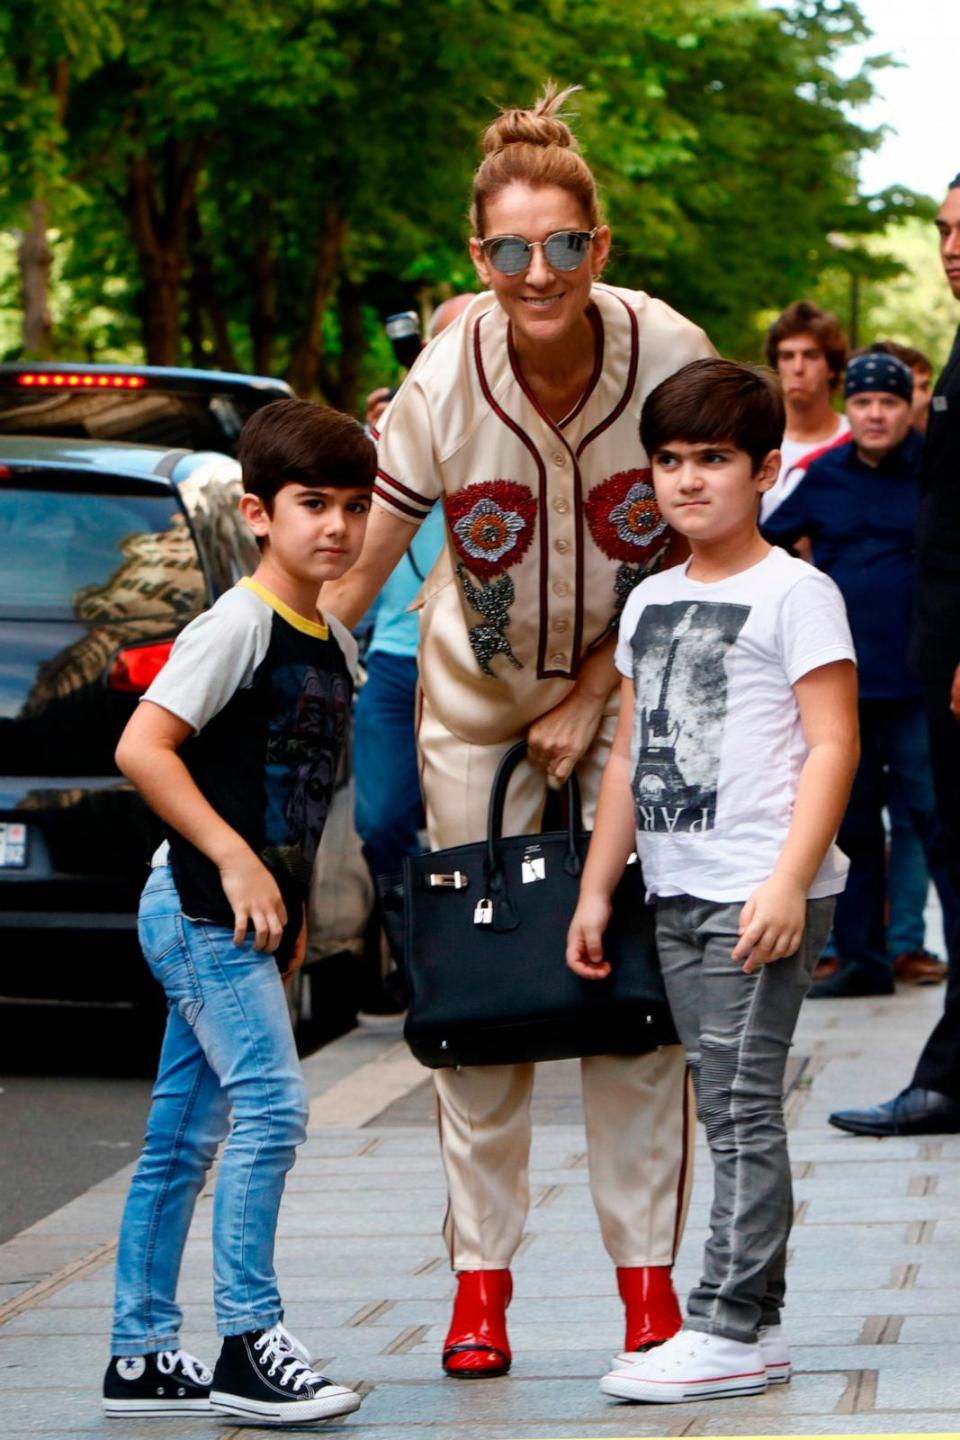 PHOTO: In this July 17, 2017, file photo, Celine Dion is shown out with her twins, Eddy and Nelson, in Paris. (NurPhoto via Getty Images, FILE)